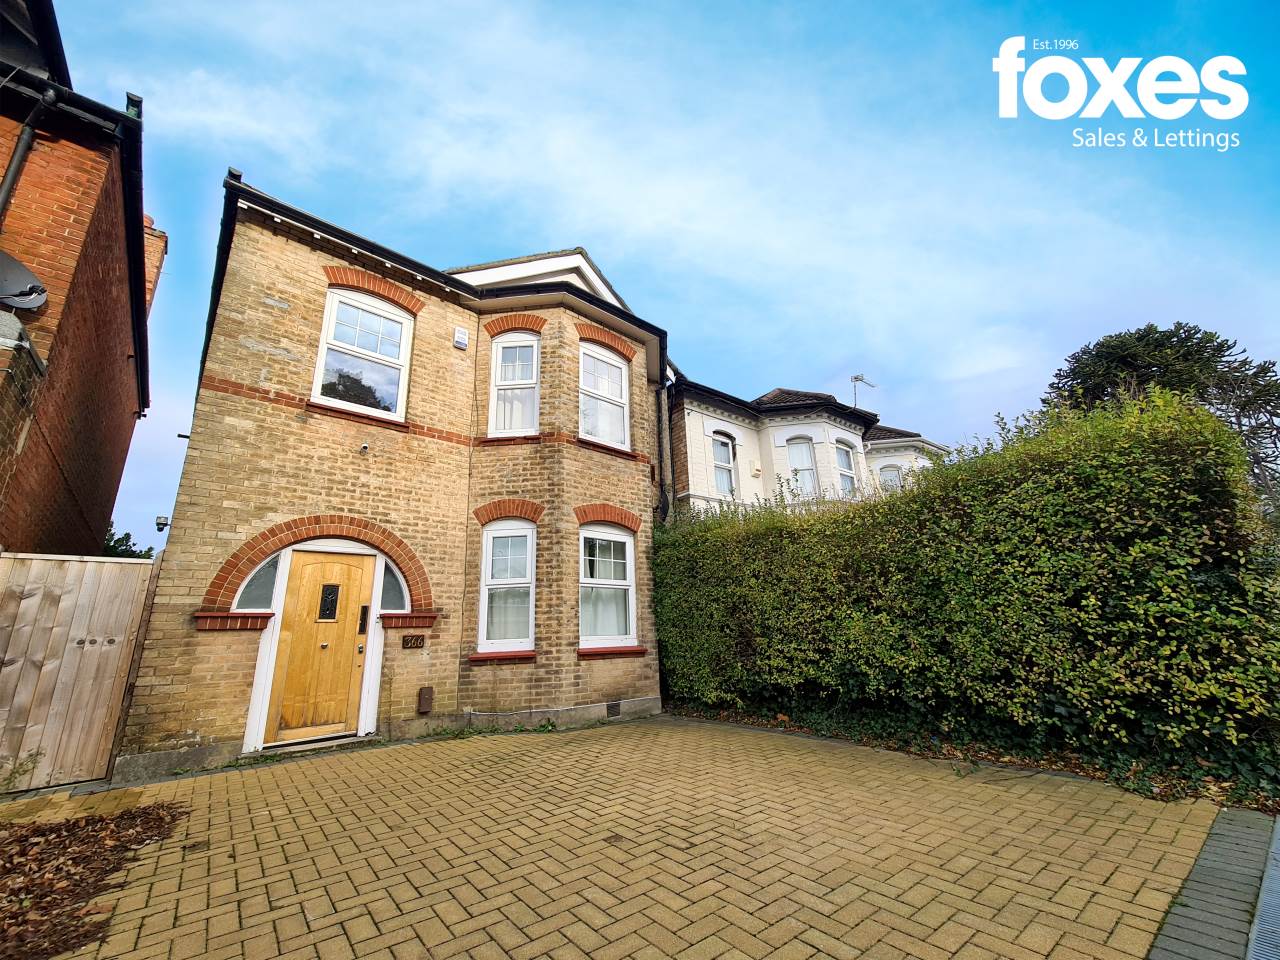 4 bed  to rent in Branksome, Poole, BH12